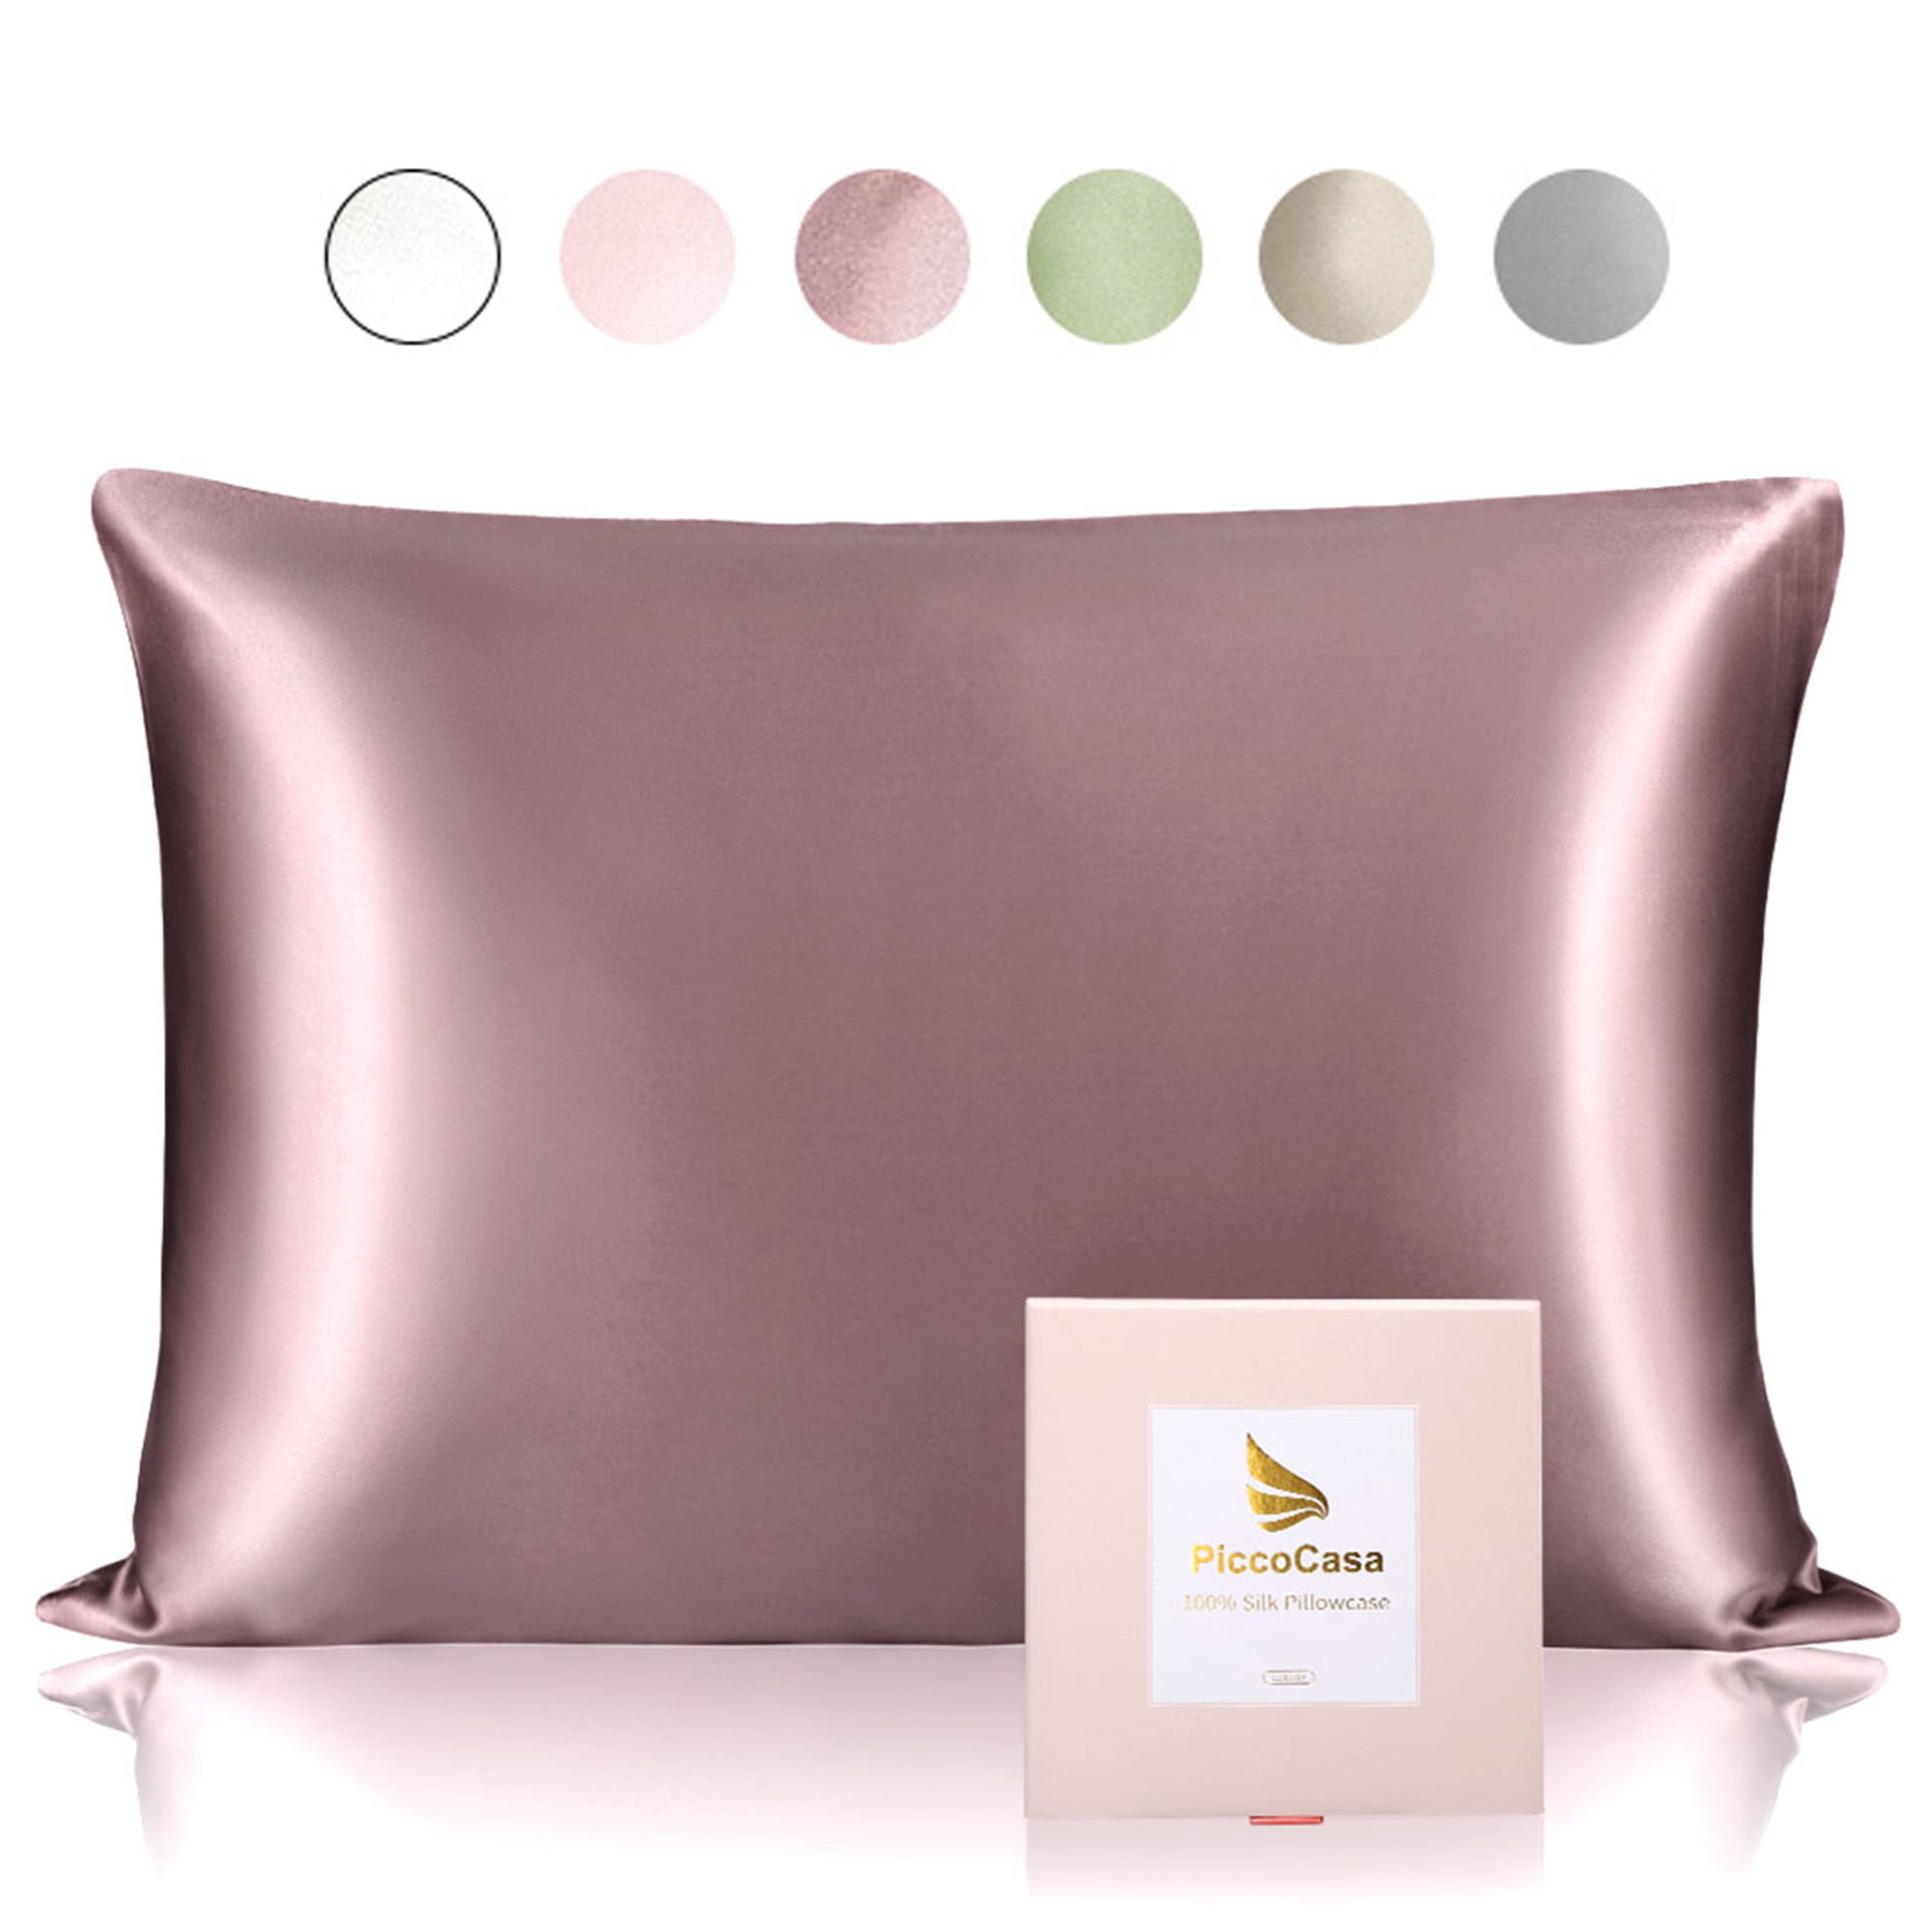 PiccoCasa 100 Pure Silk Pillowcase for Hair and Skin 25 Momme Breathable Pure Silk Pillow Cases